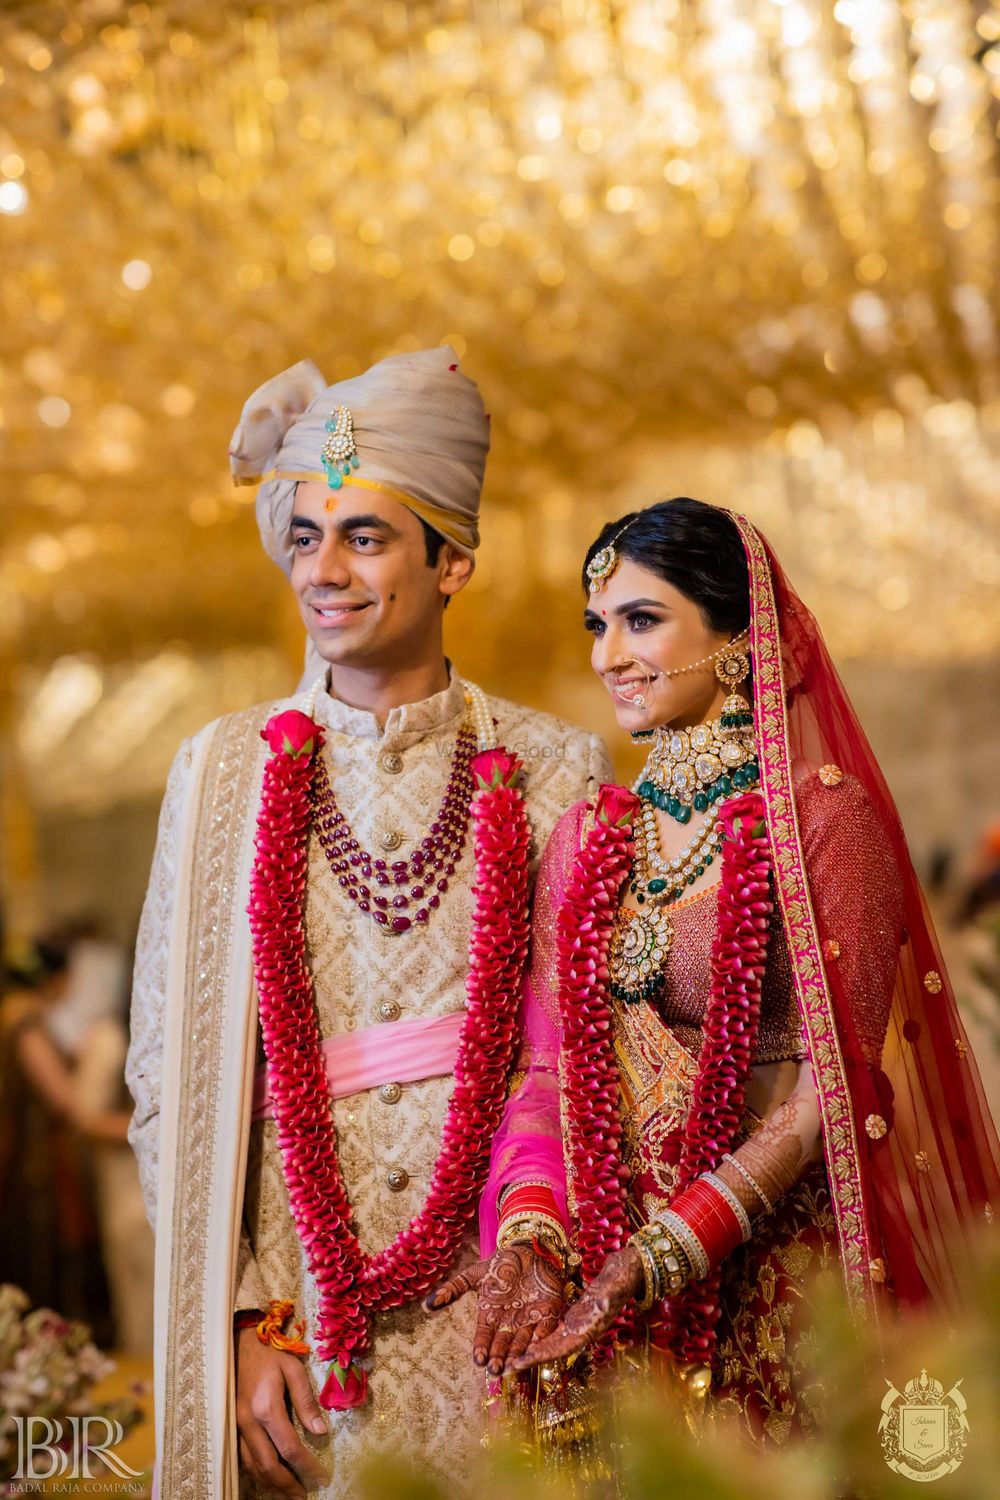 Photo of contrasting bride and groom outfits wearing red jaimalas